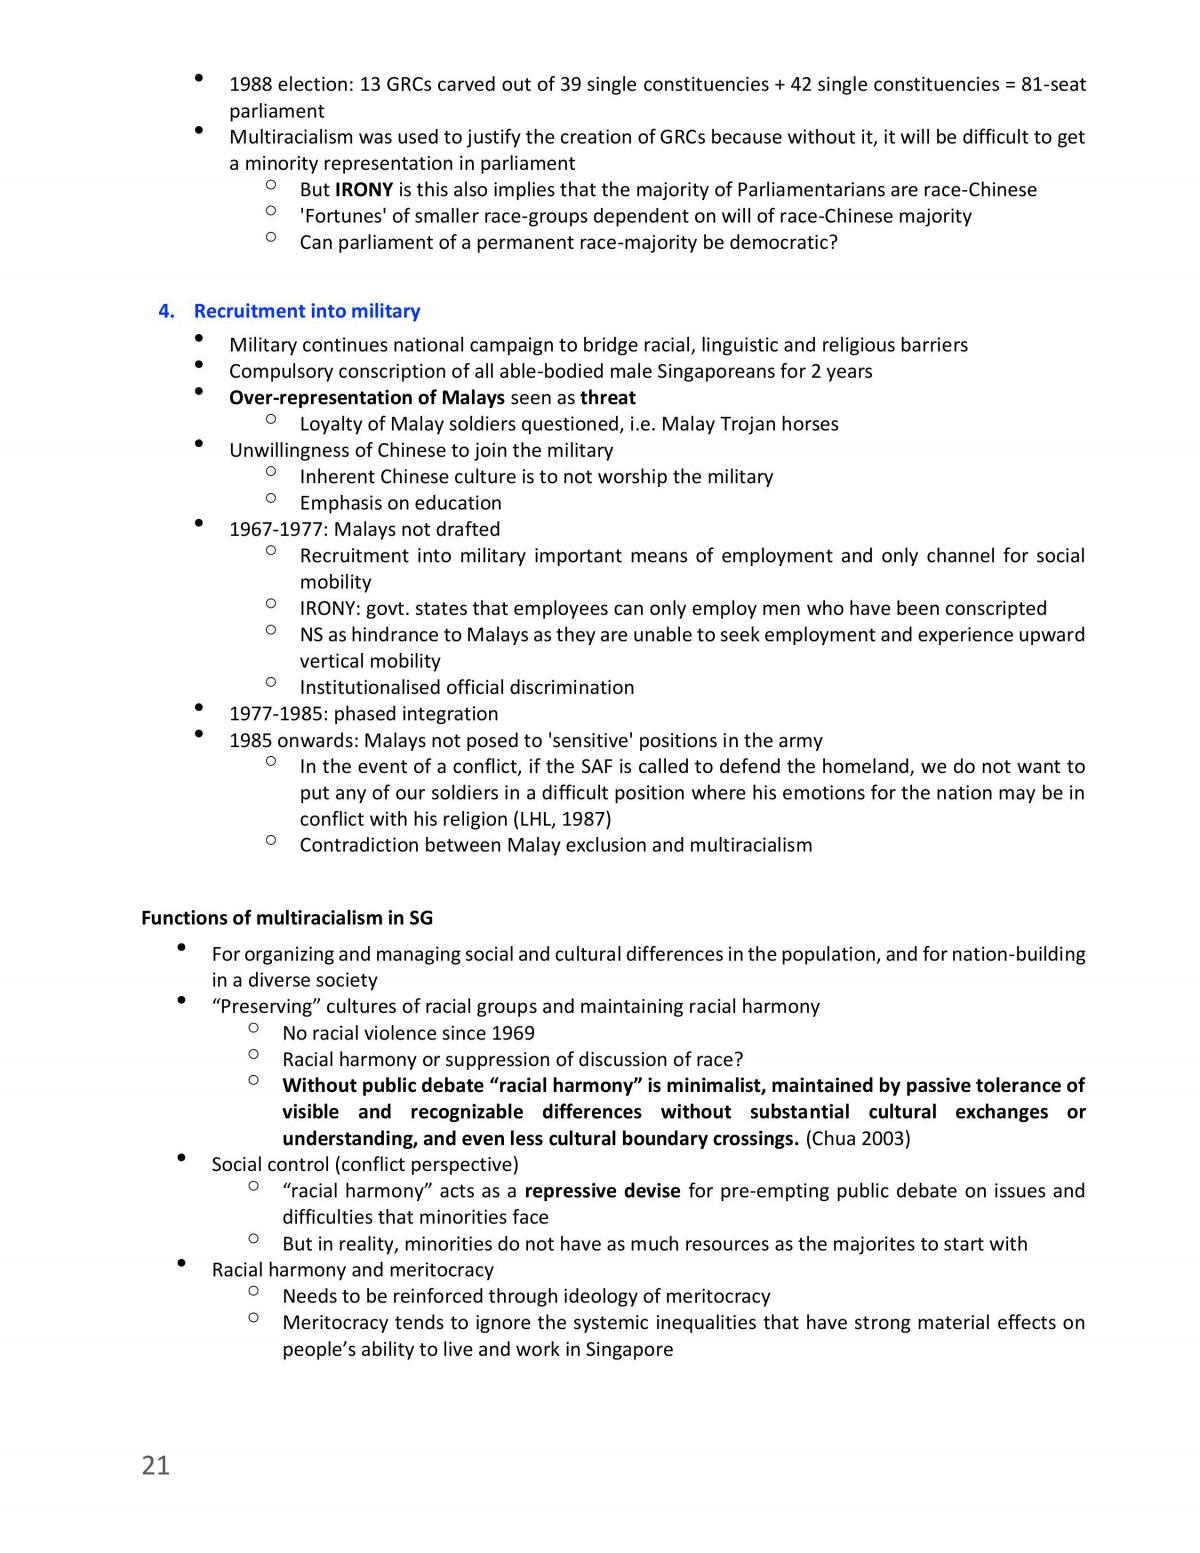 GES1028 Full set of notes - Page 21